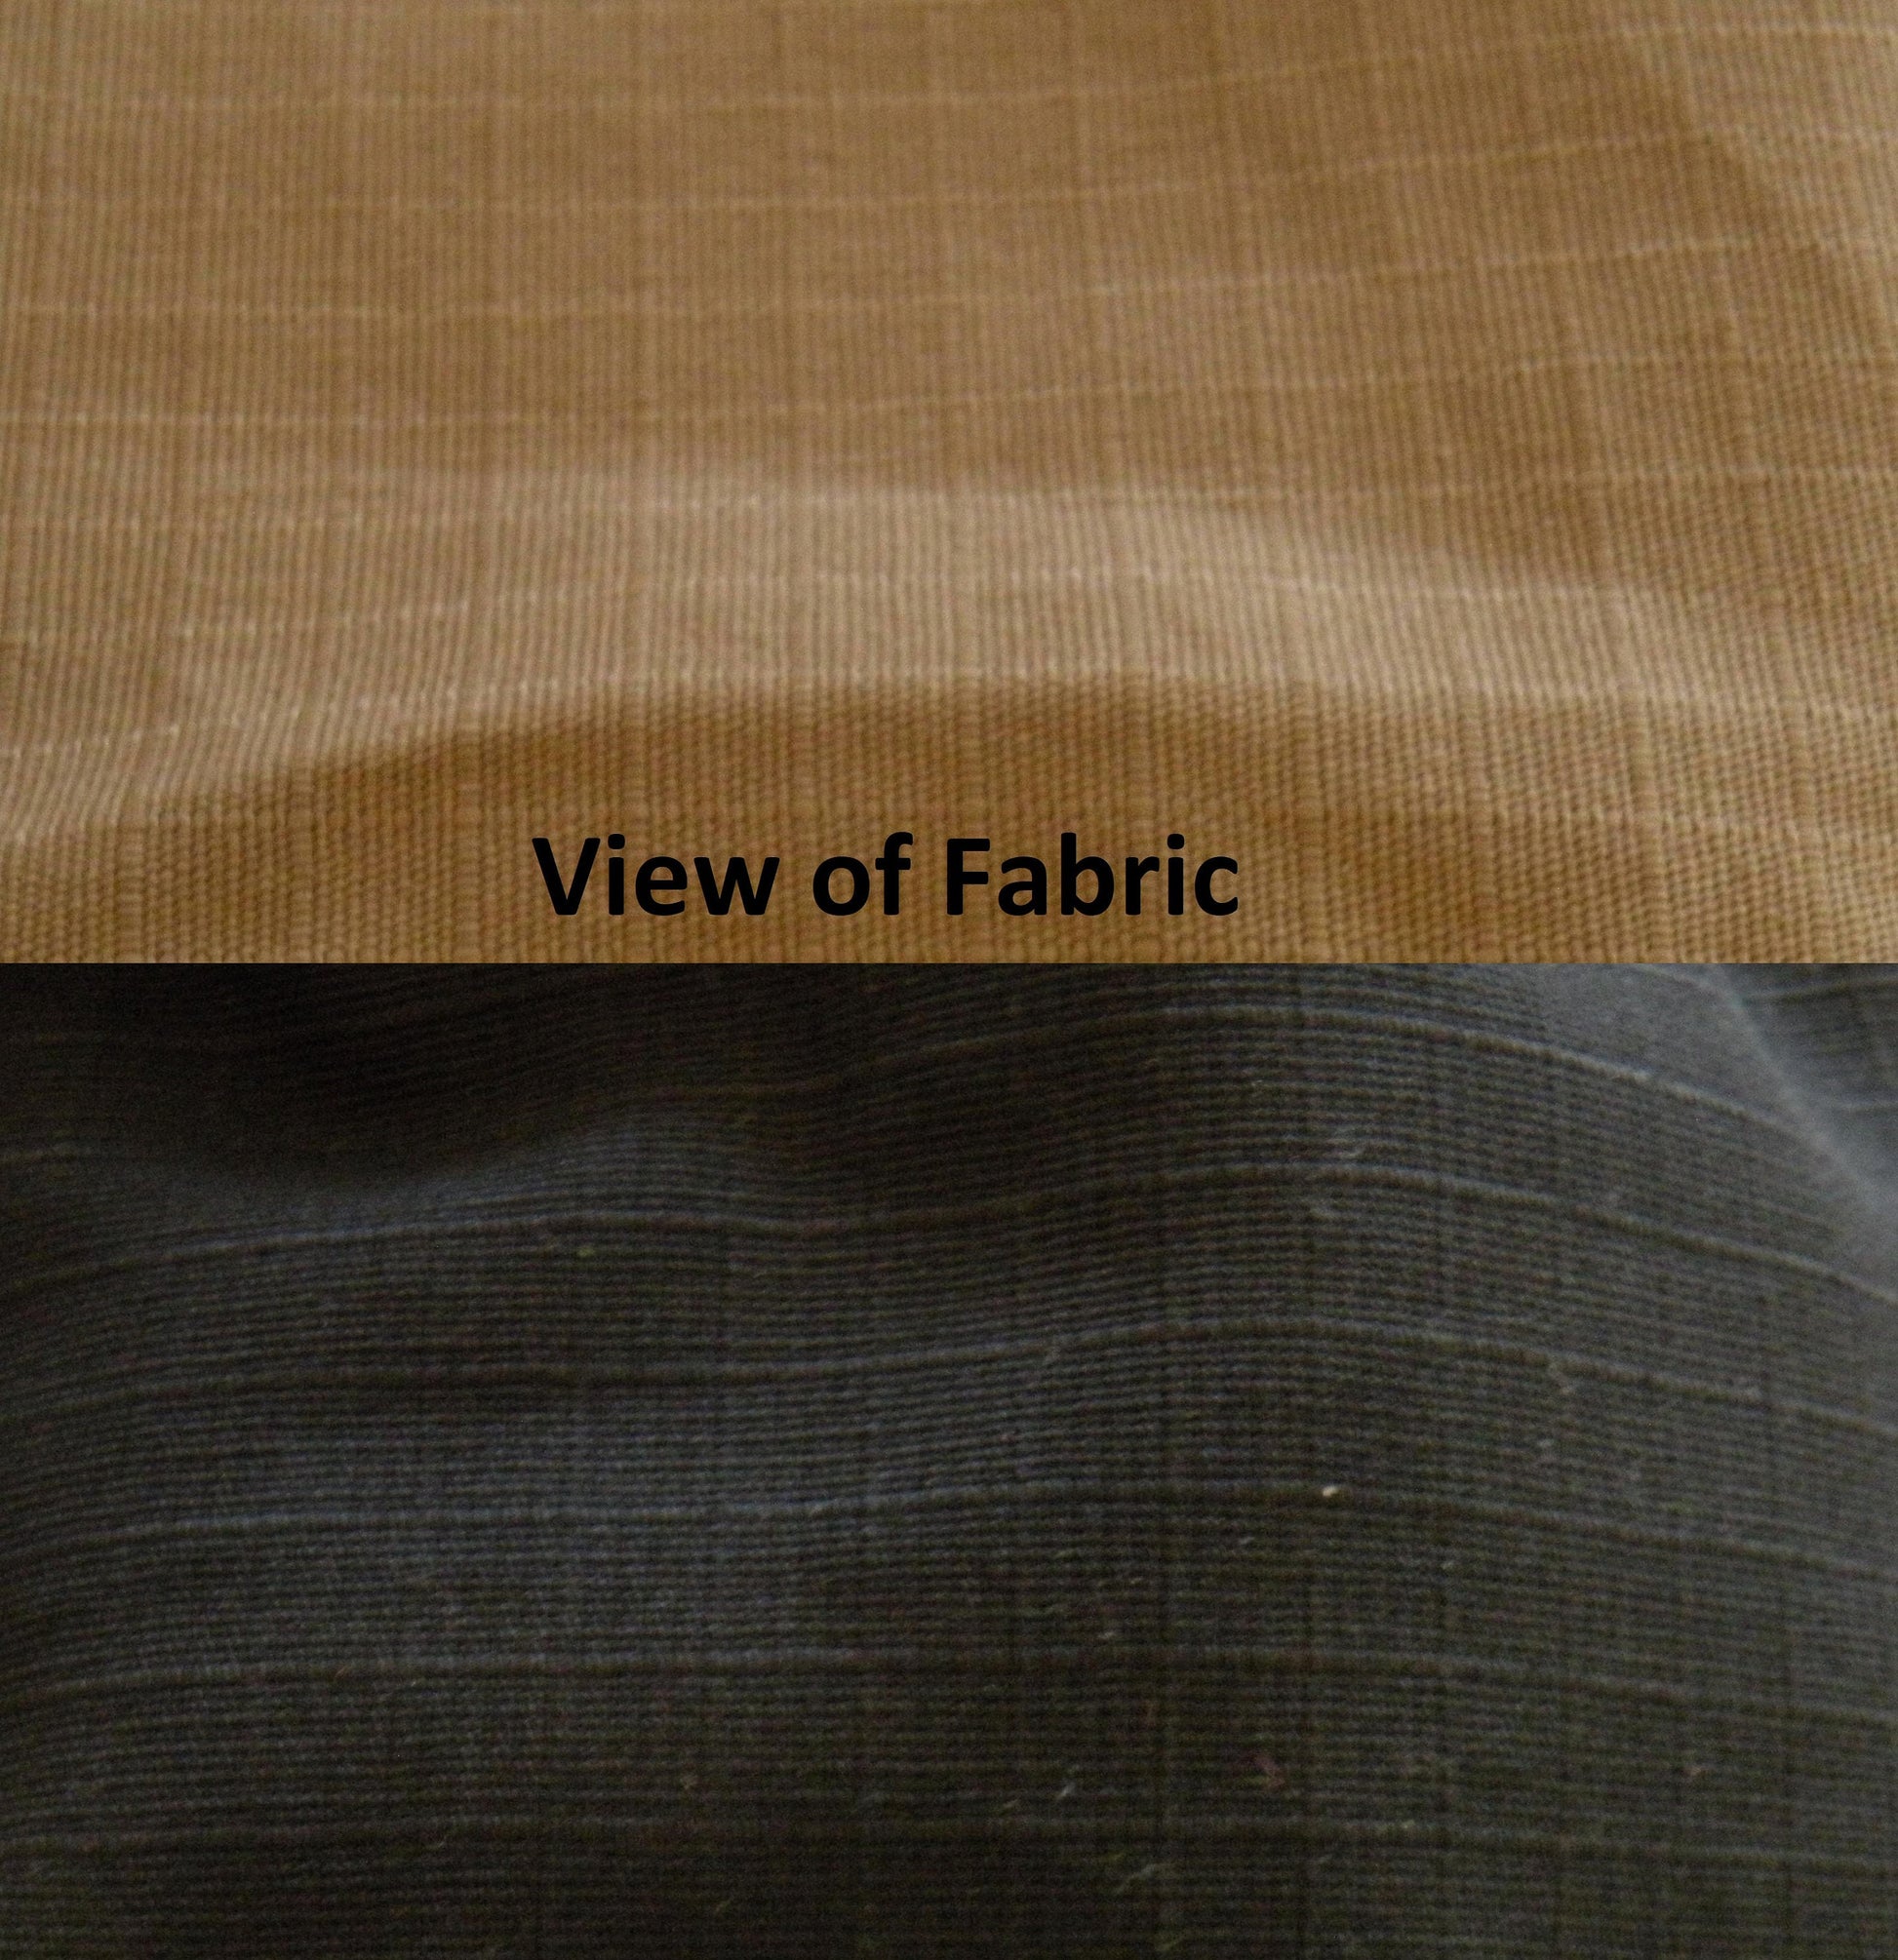 view of tan and black fabric 100% cotton ripstop material